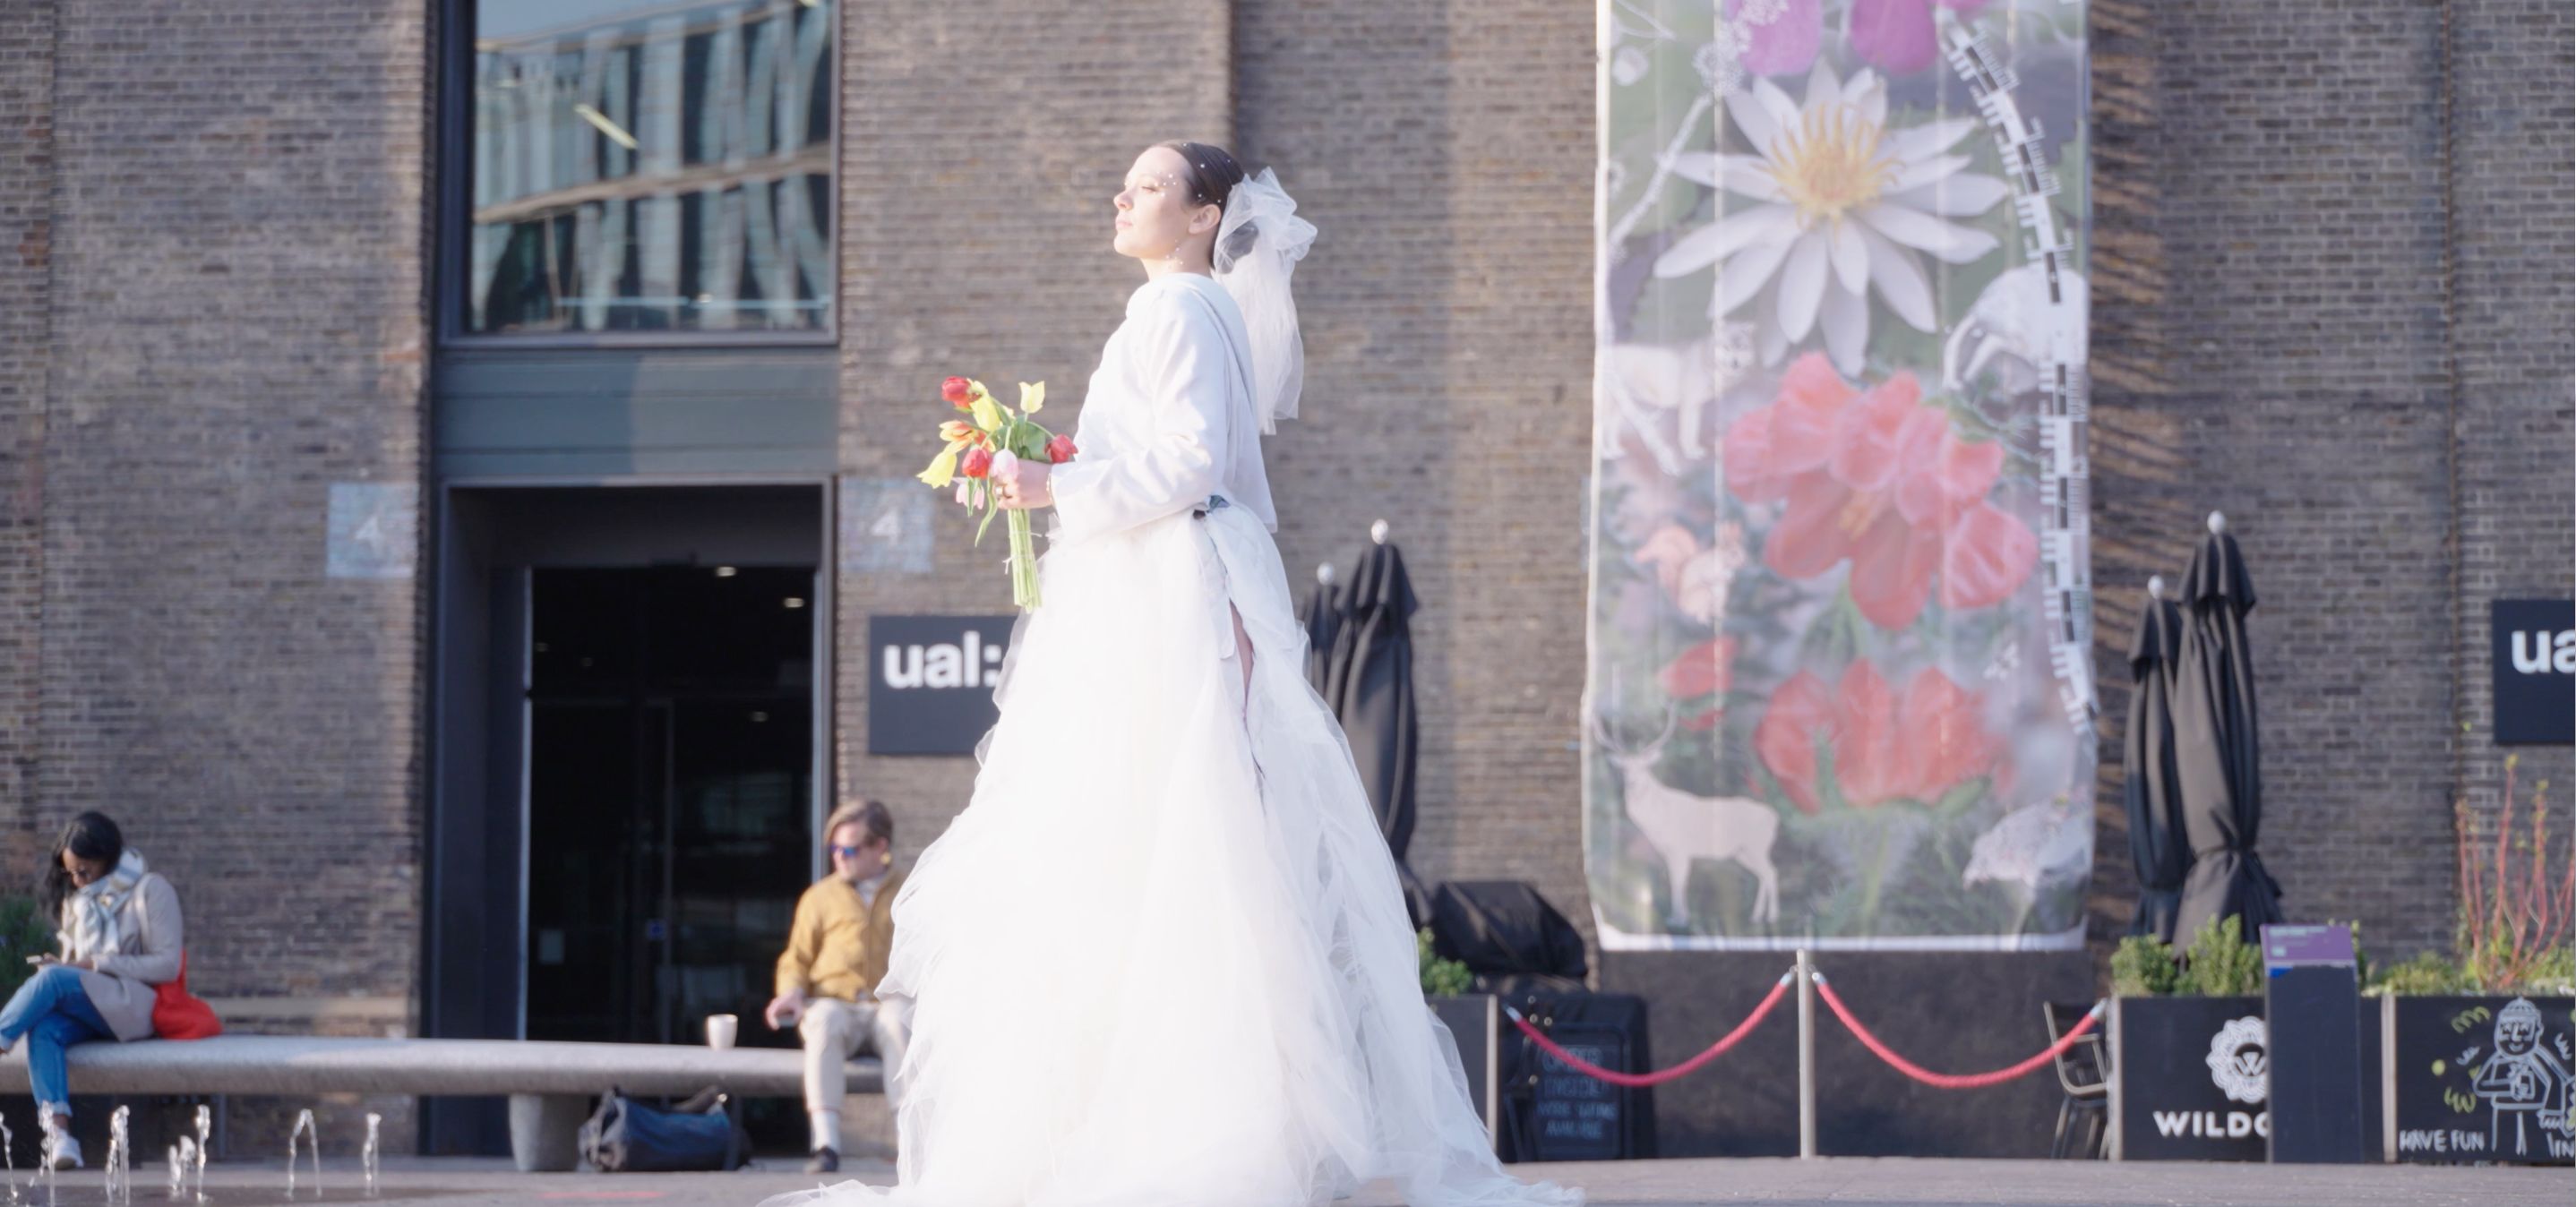 Person in bridal dress outside UAL building